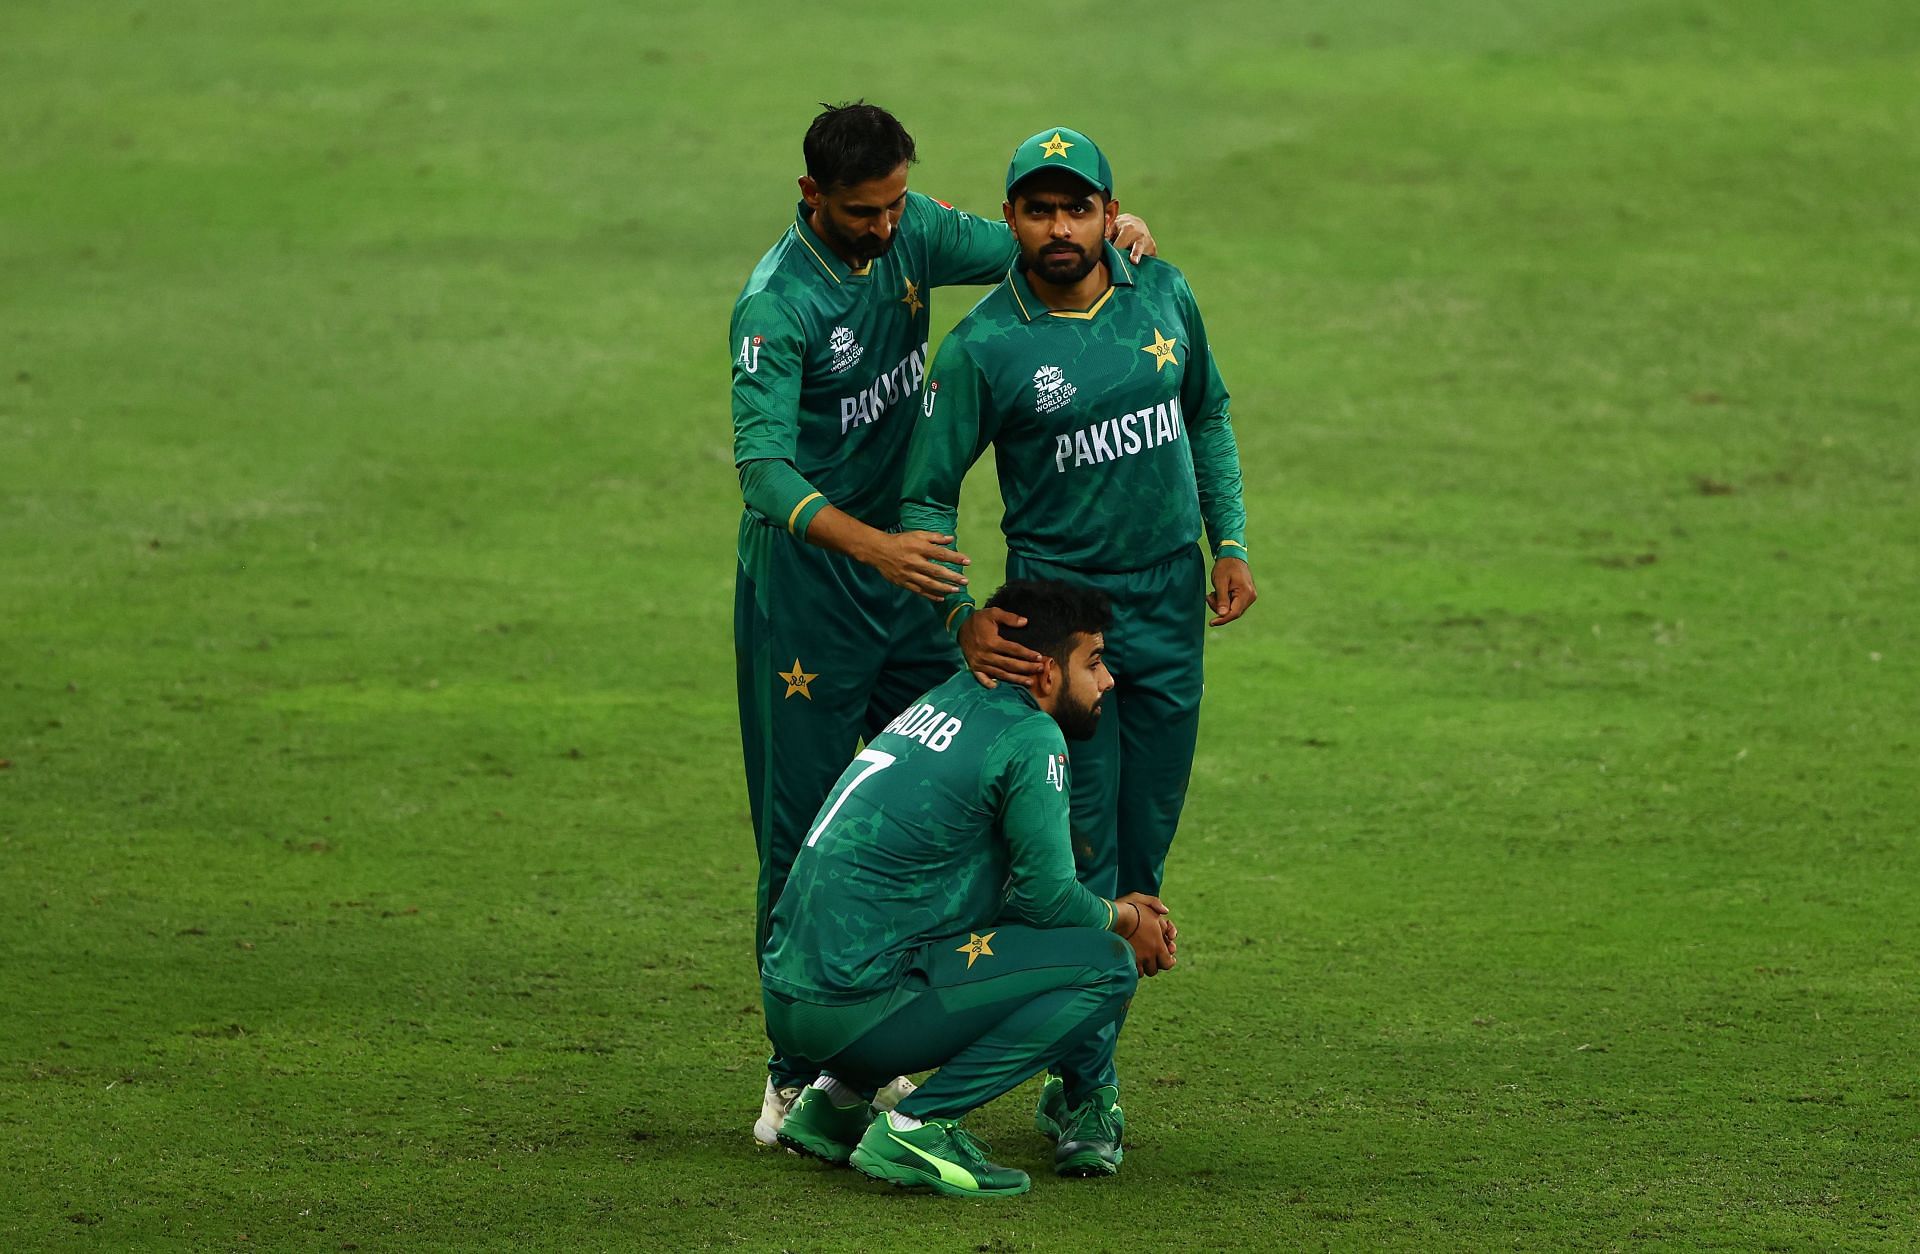 It was agony in the end for Pakistan, who once again crumbled against Australia in the knockout stage.